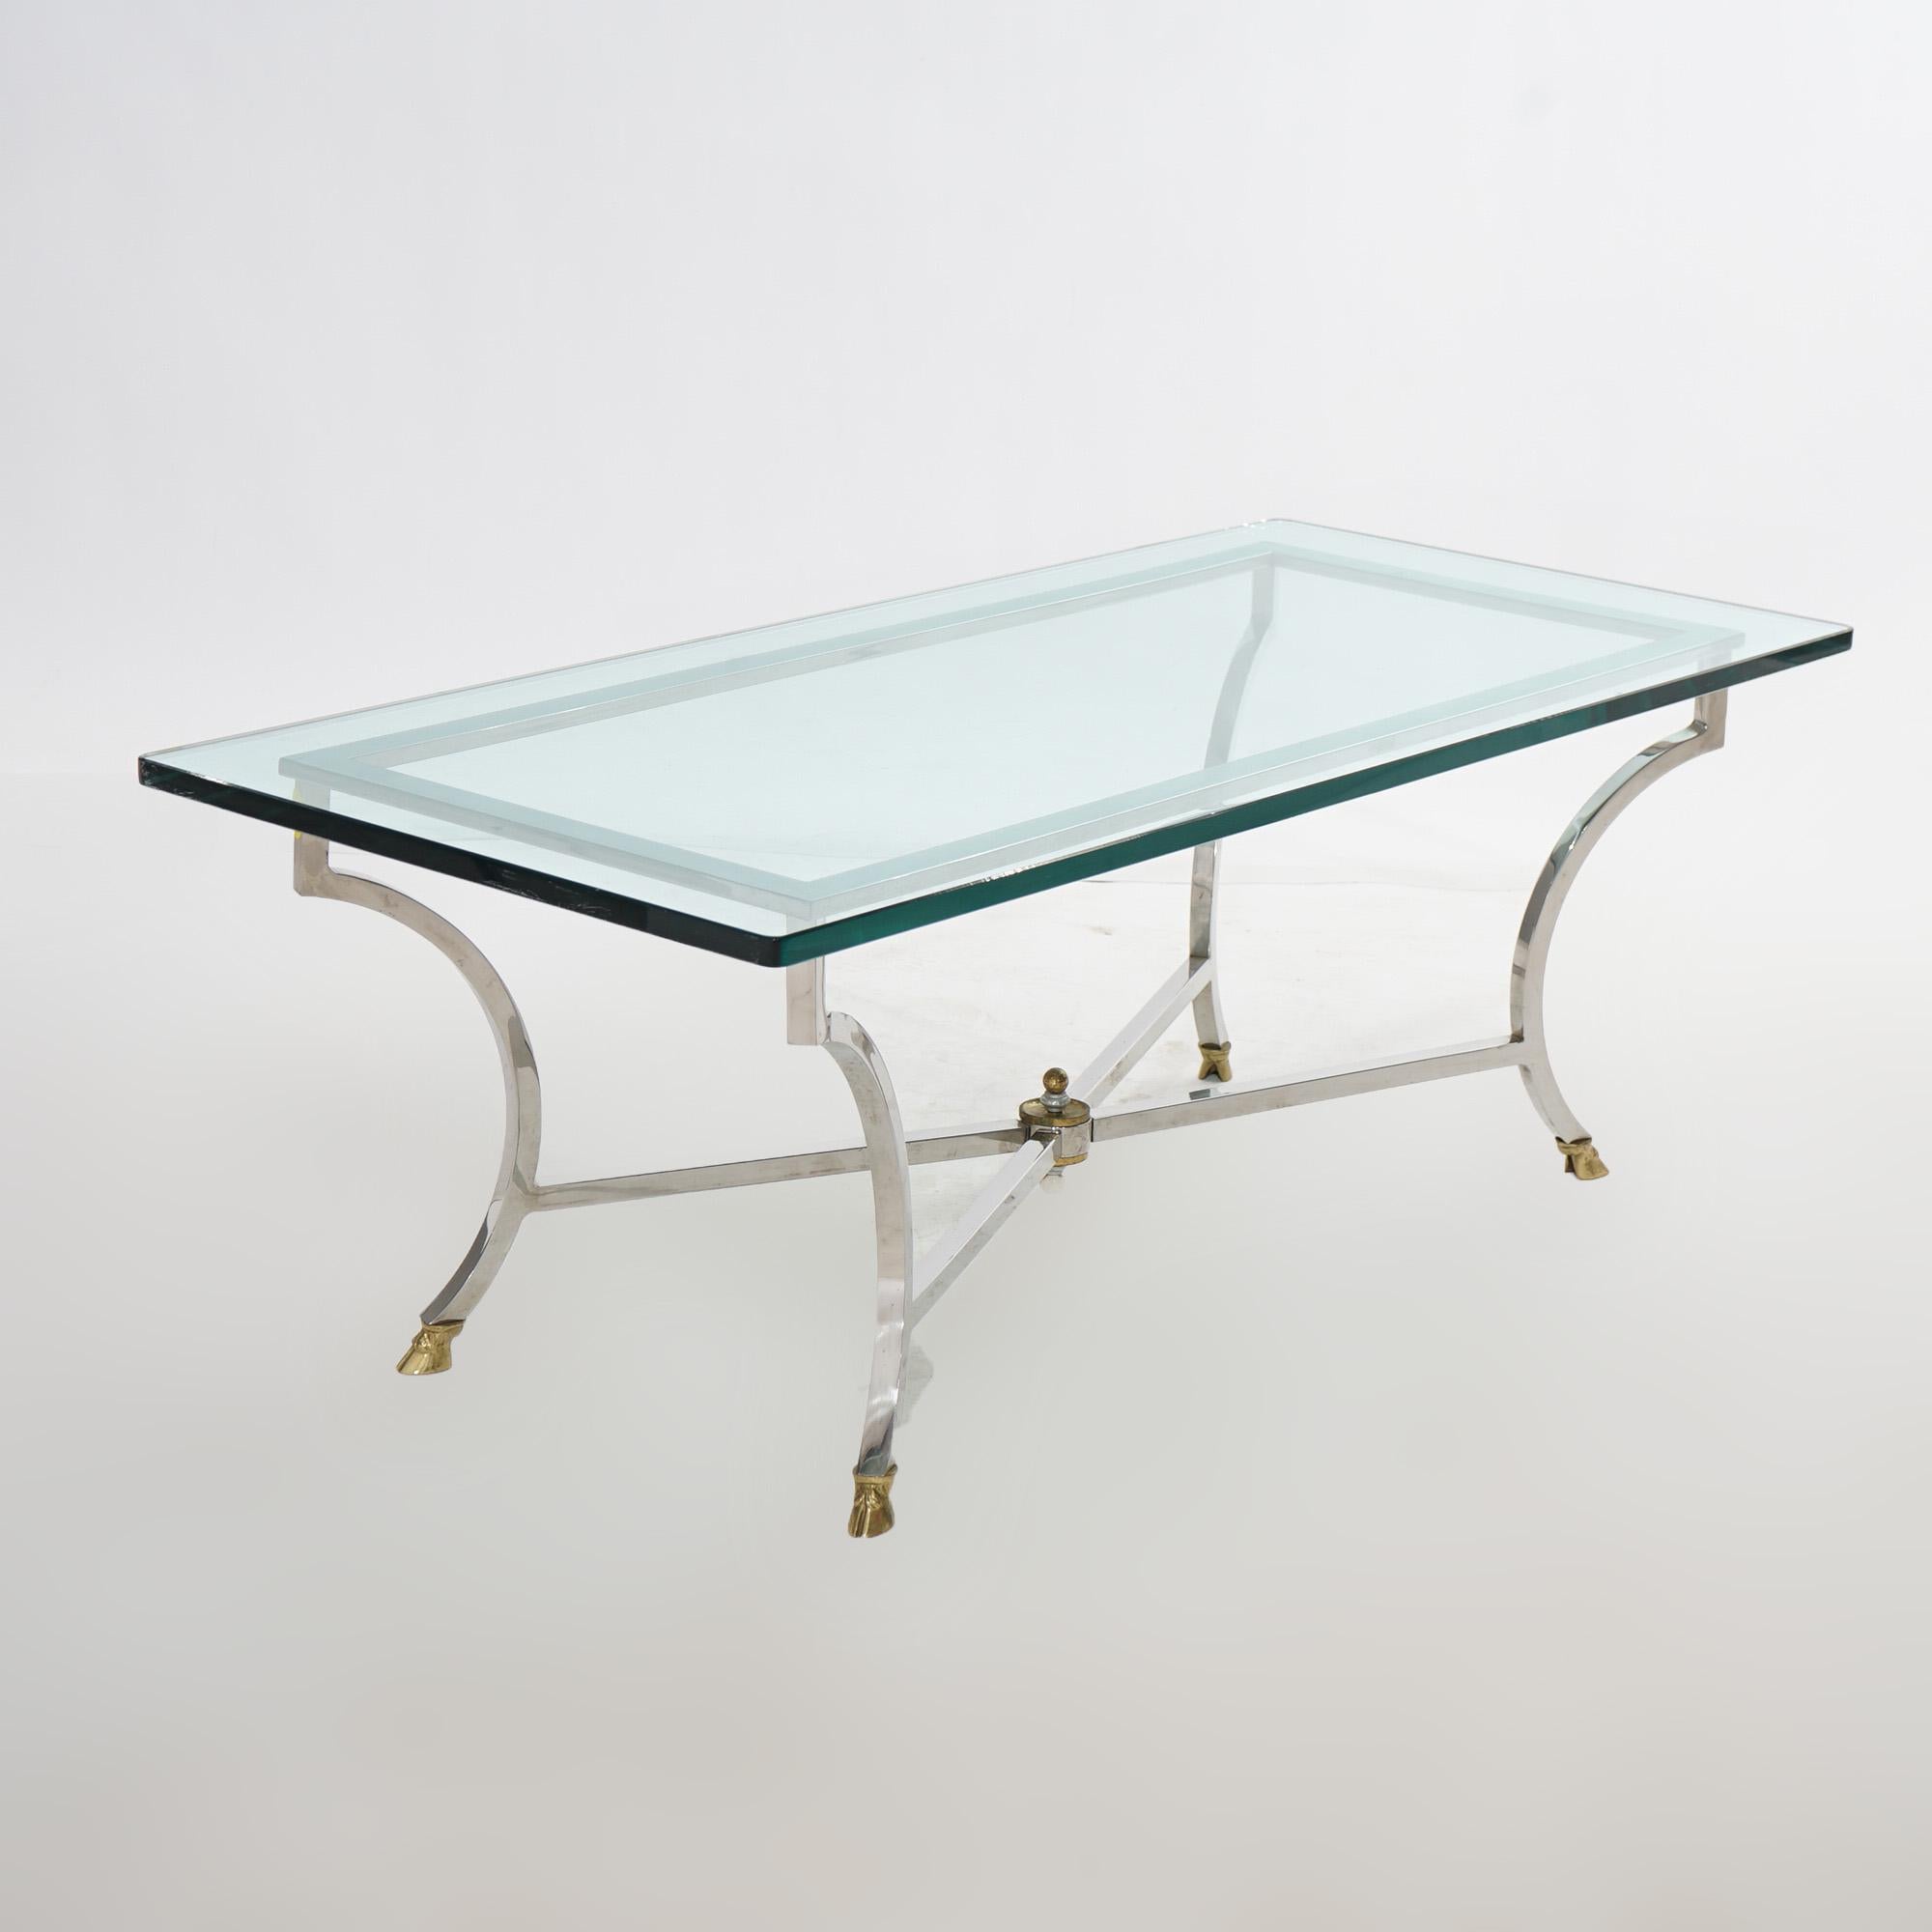 A Mid Century Modern Hollywood Regency coffee table offers glass top over chrome base having stylized splayed legs terminating in brass hoof feet, c1960

Measures- 17.25''H x 48''W x 21.75''D